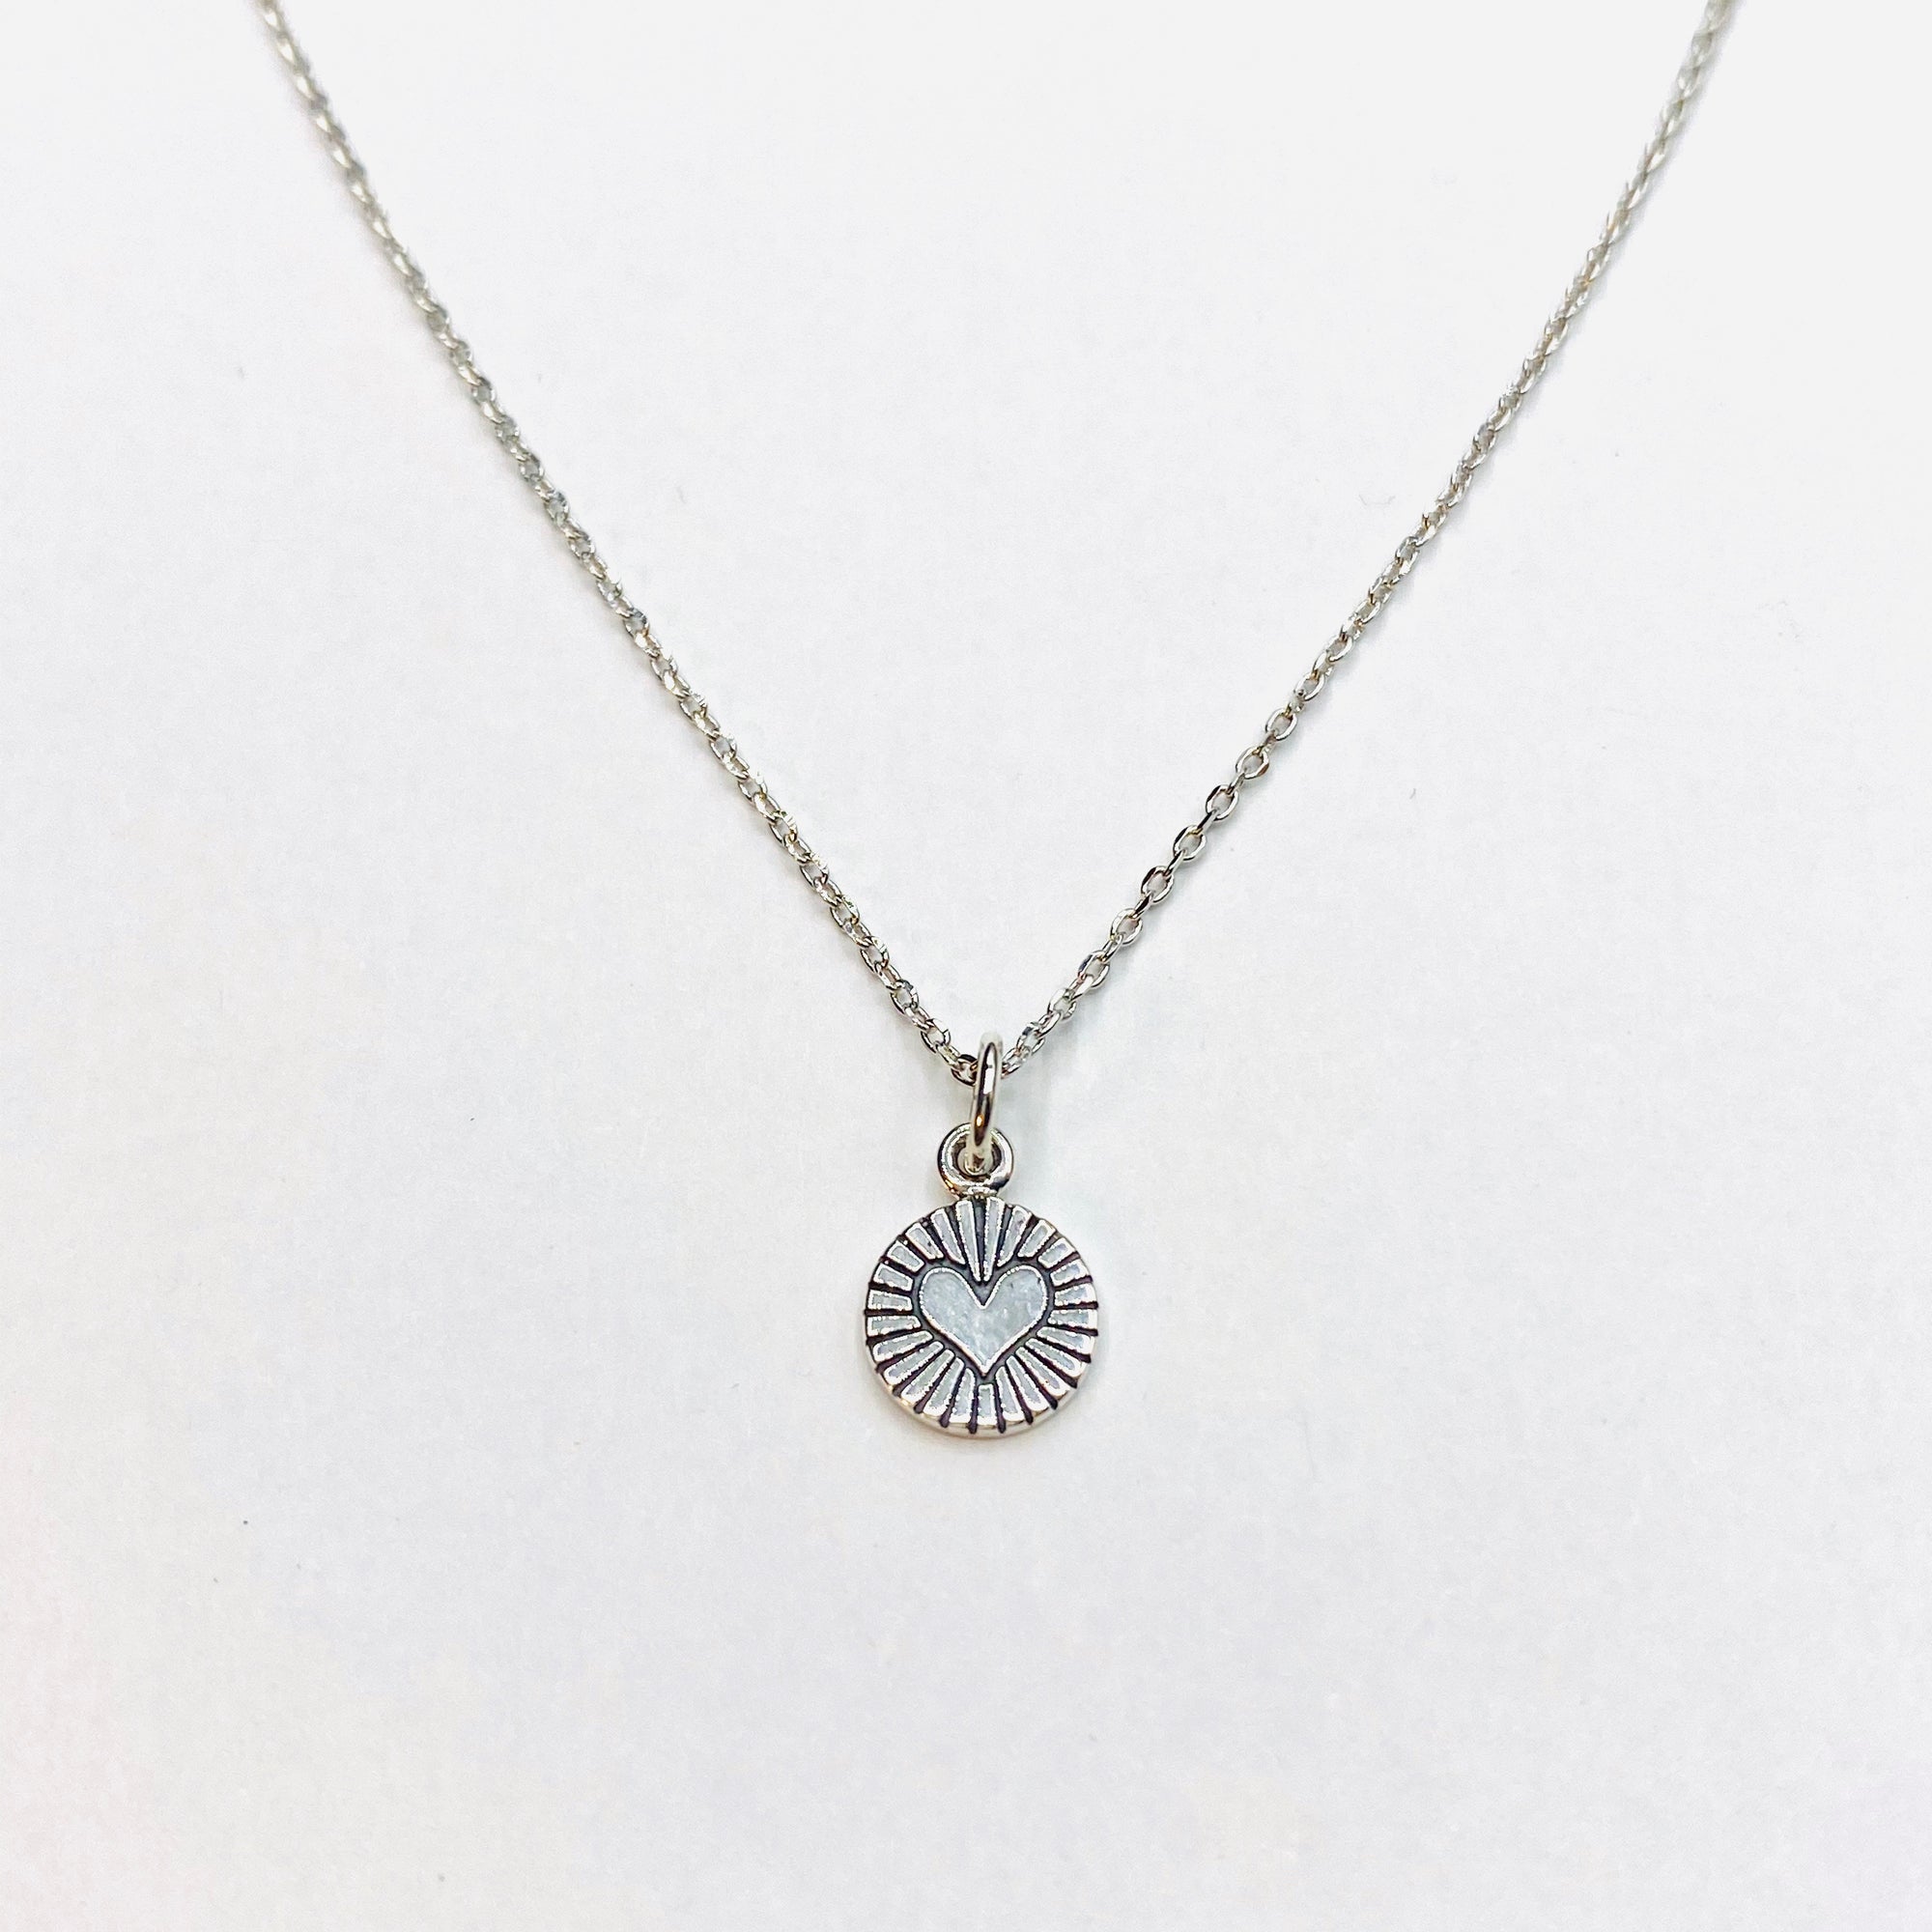 Radiant heart necklace